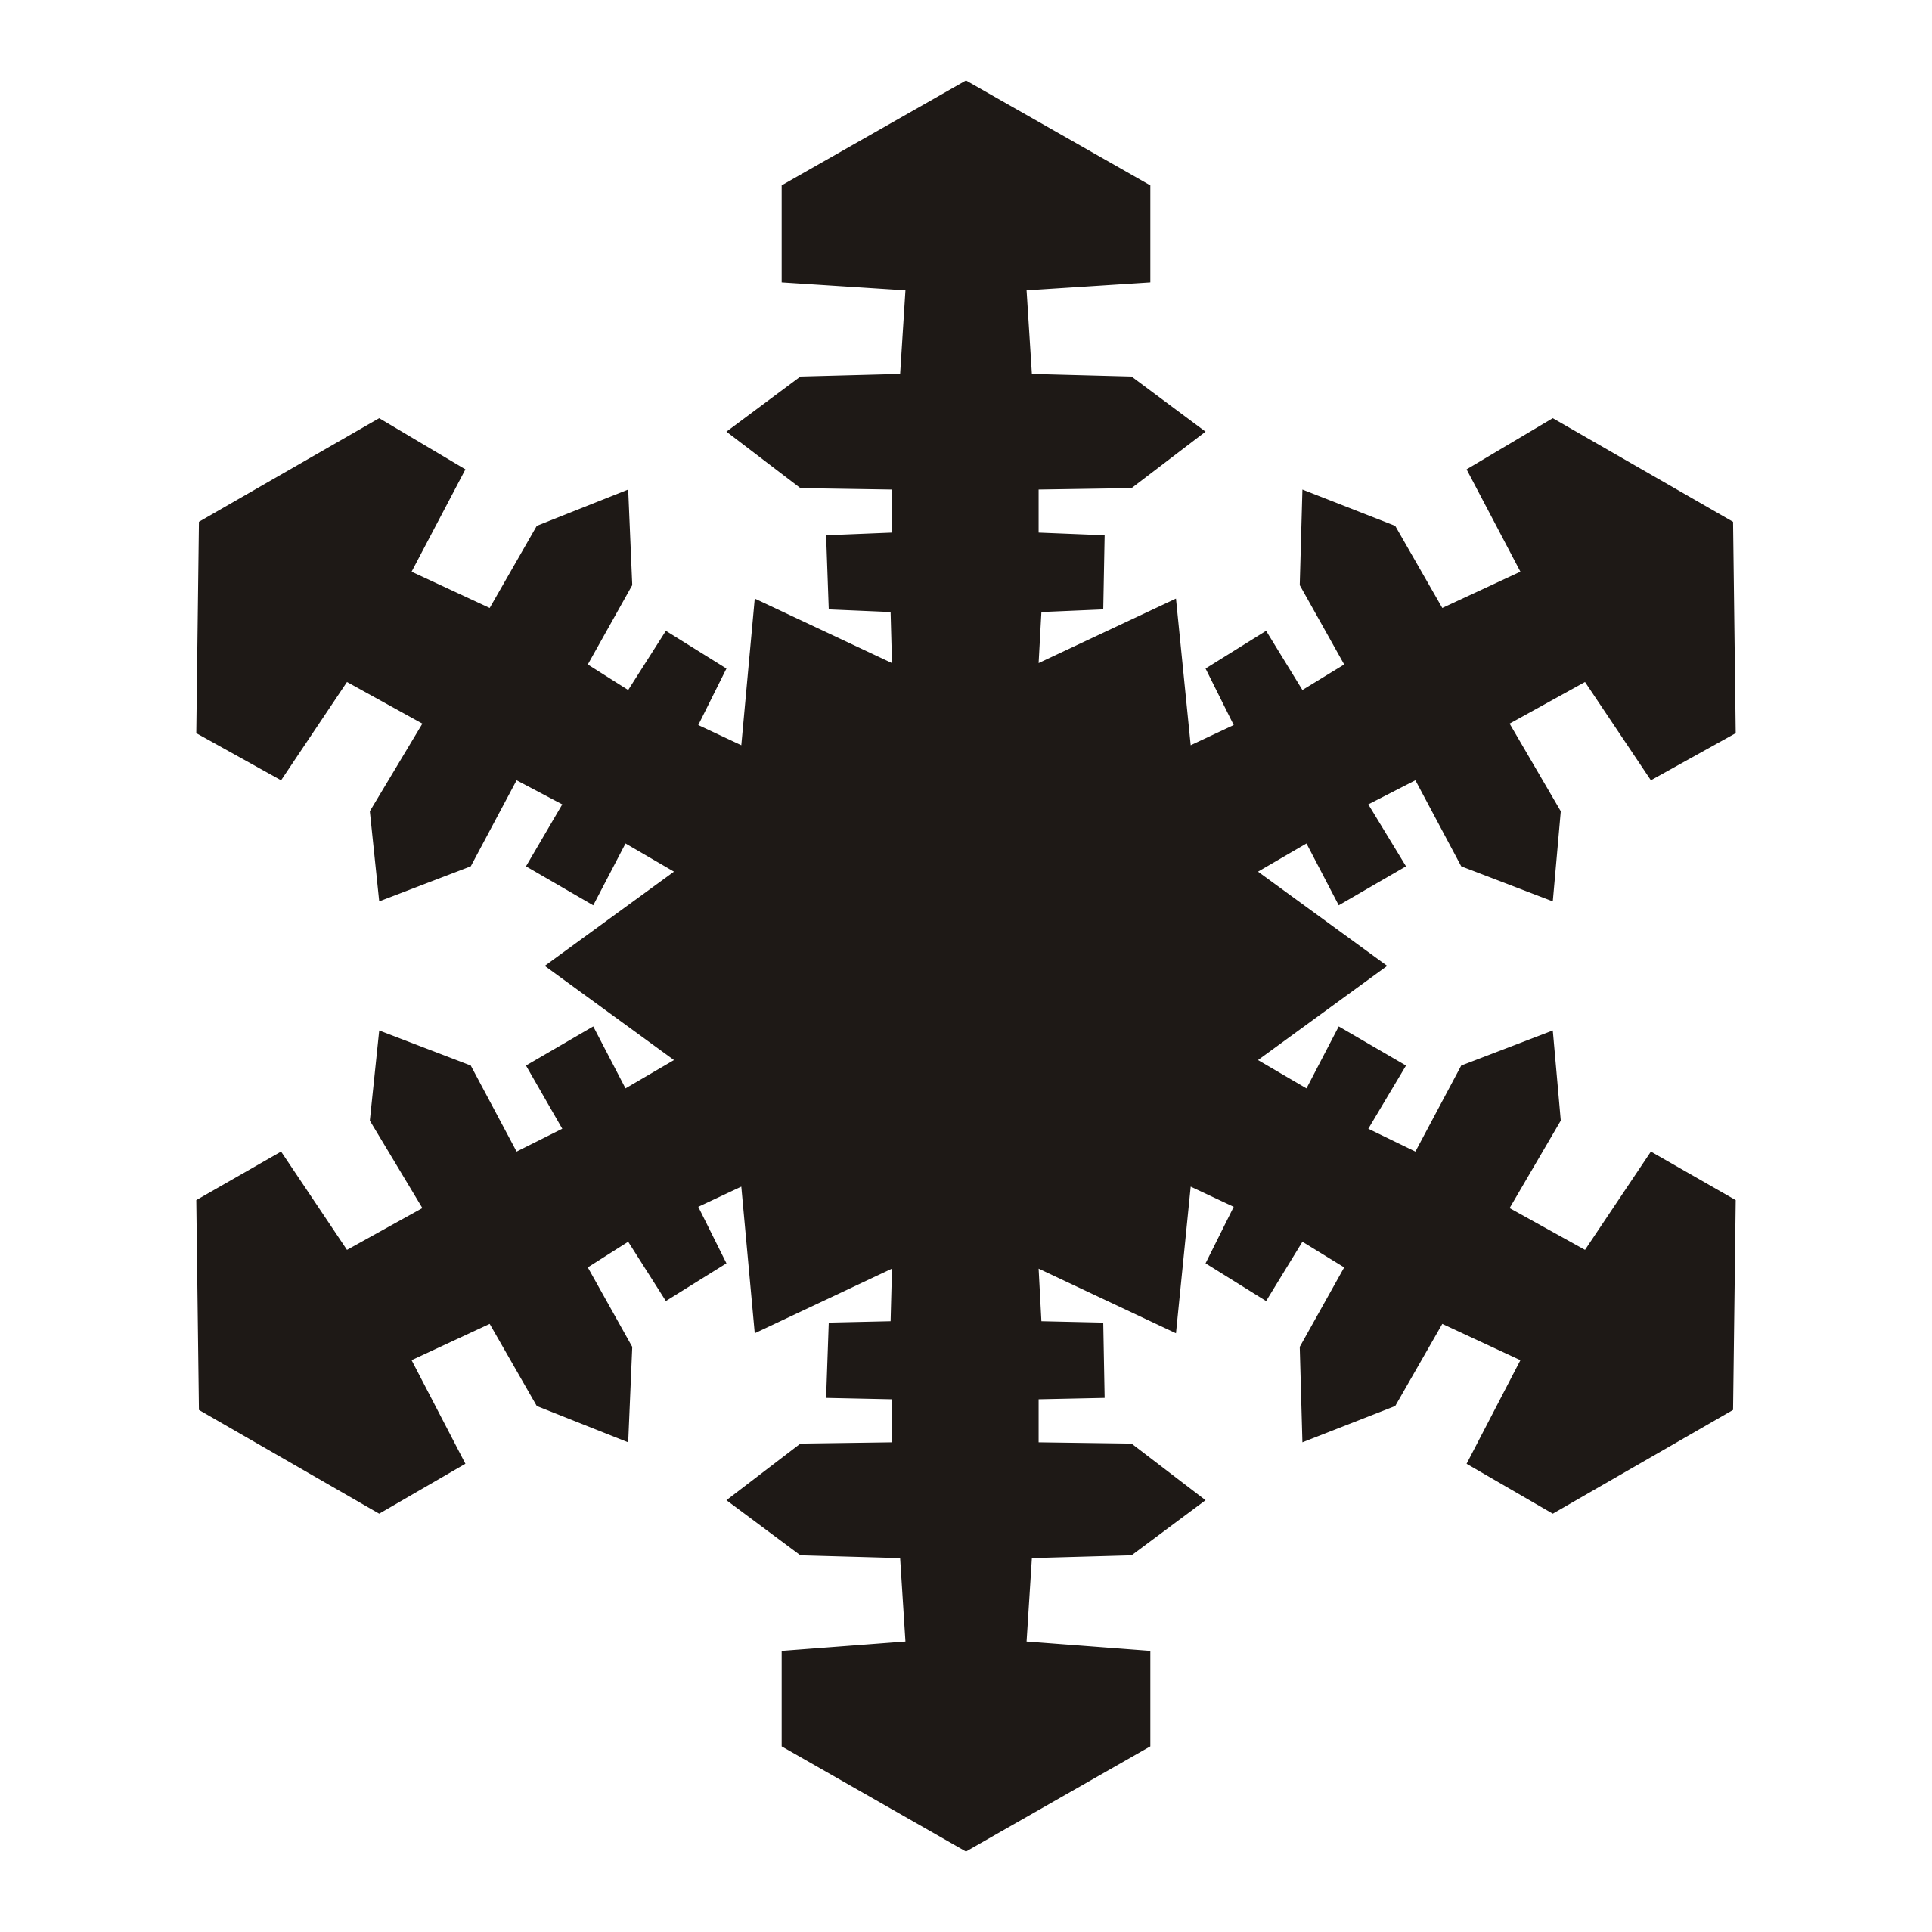 Free Black And White Snowflake Clipart, Download Free Clip